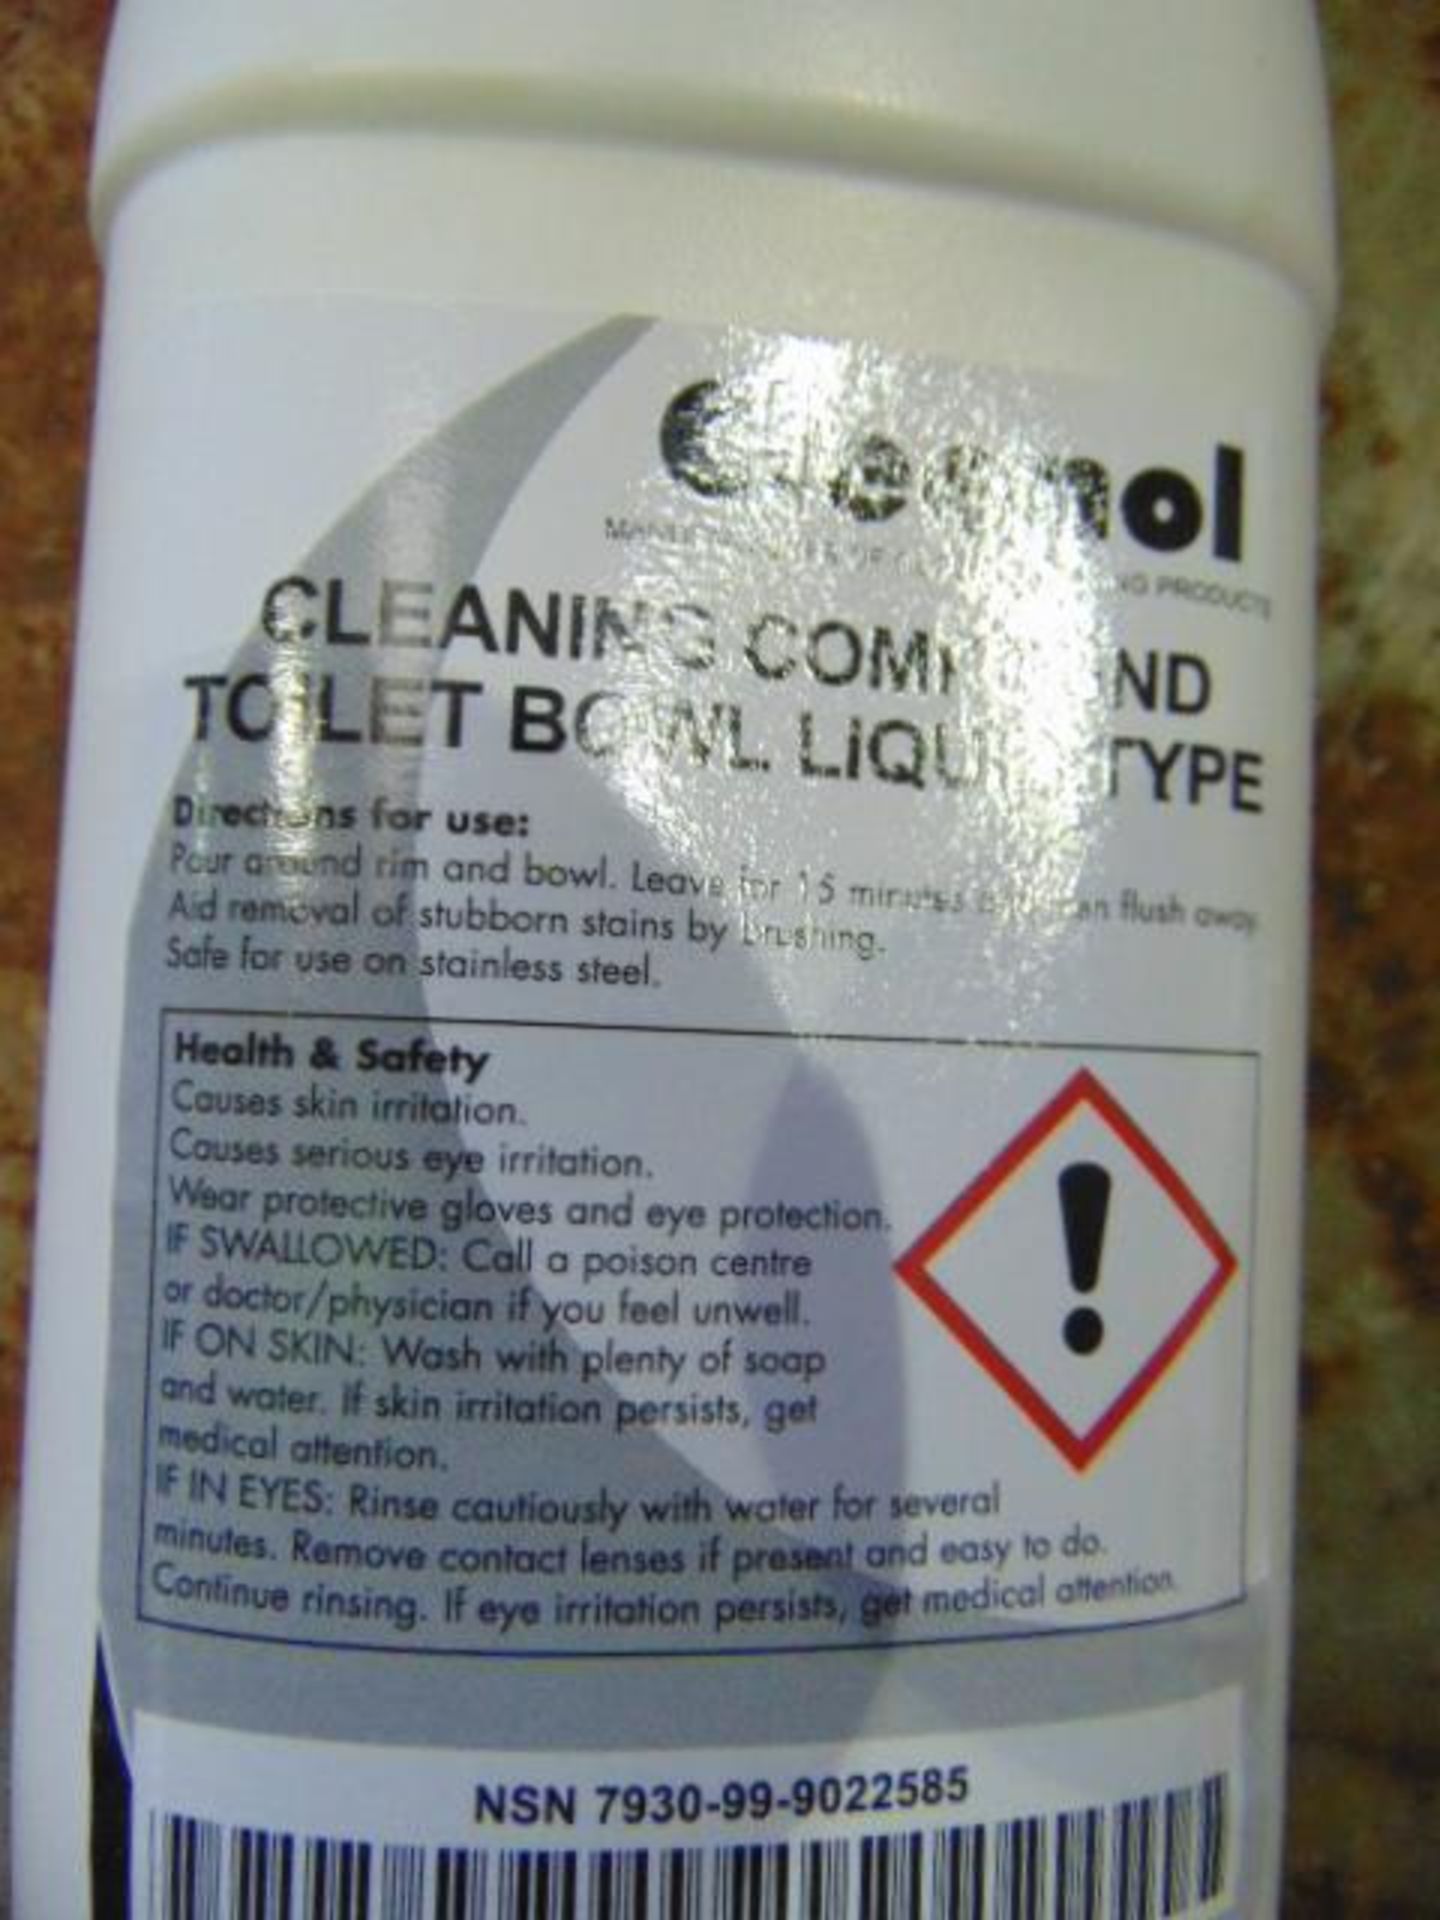 Qty 48 x 750ml Cleenol Toilet Cleaning Compound Liquid direct from reserve stores - Image 3 of 3